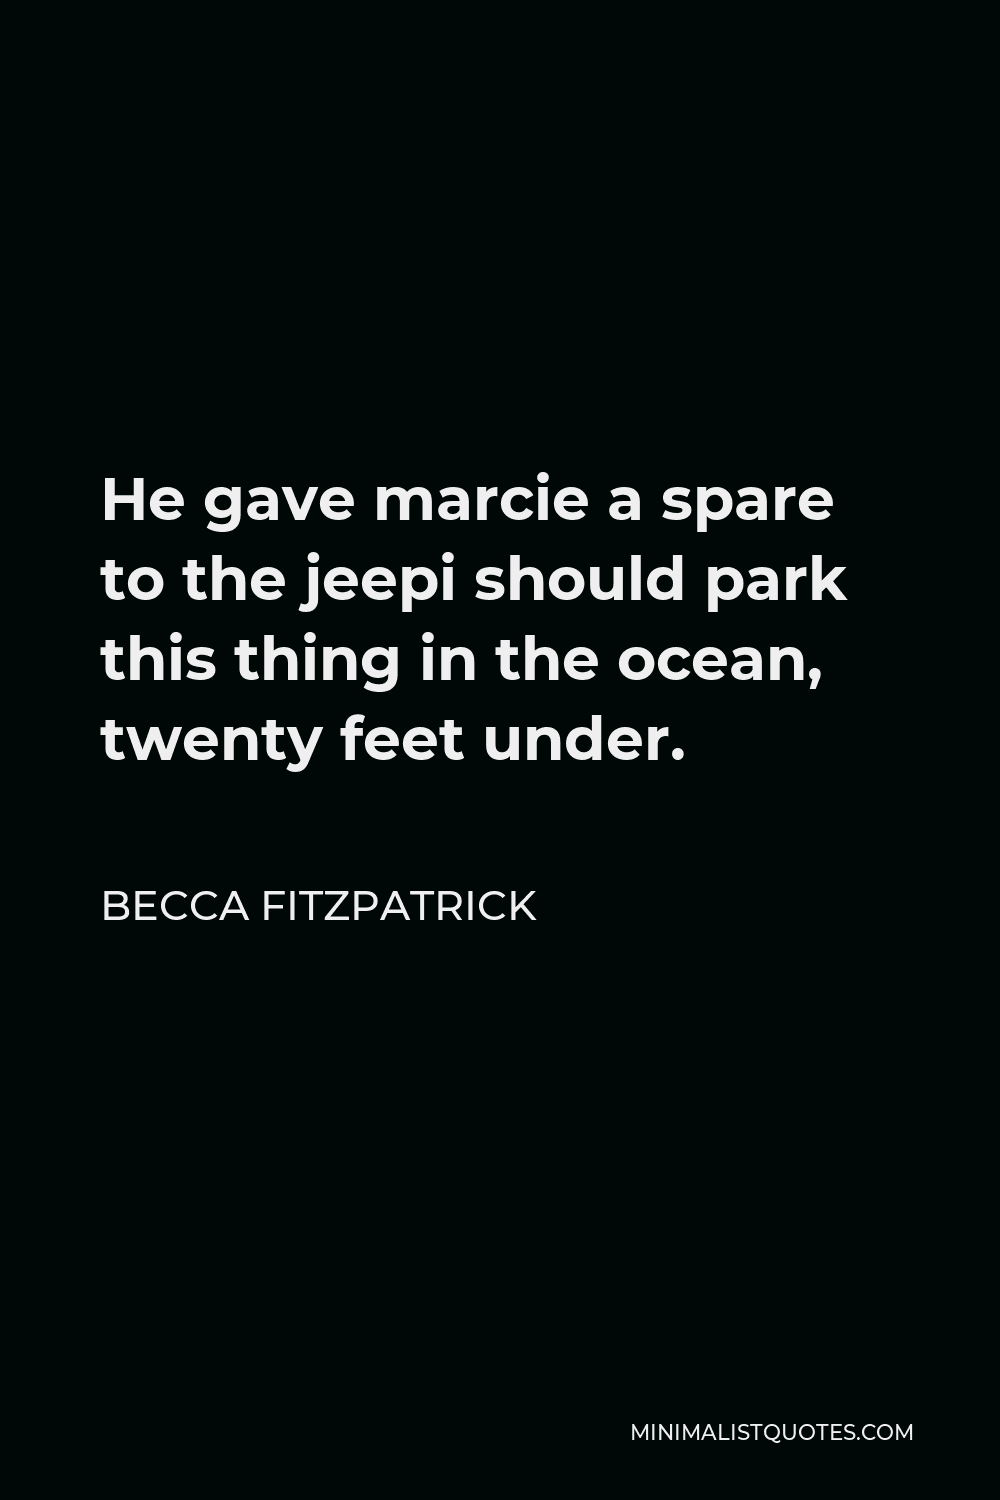 Becca Fitzpatrick Quote - He gave marcie a spare to the jeepi should park this thing in the ocean, twenty feet under.